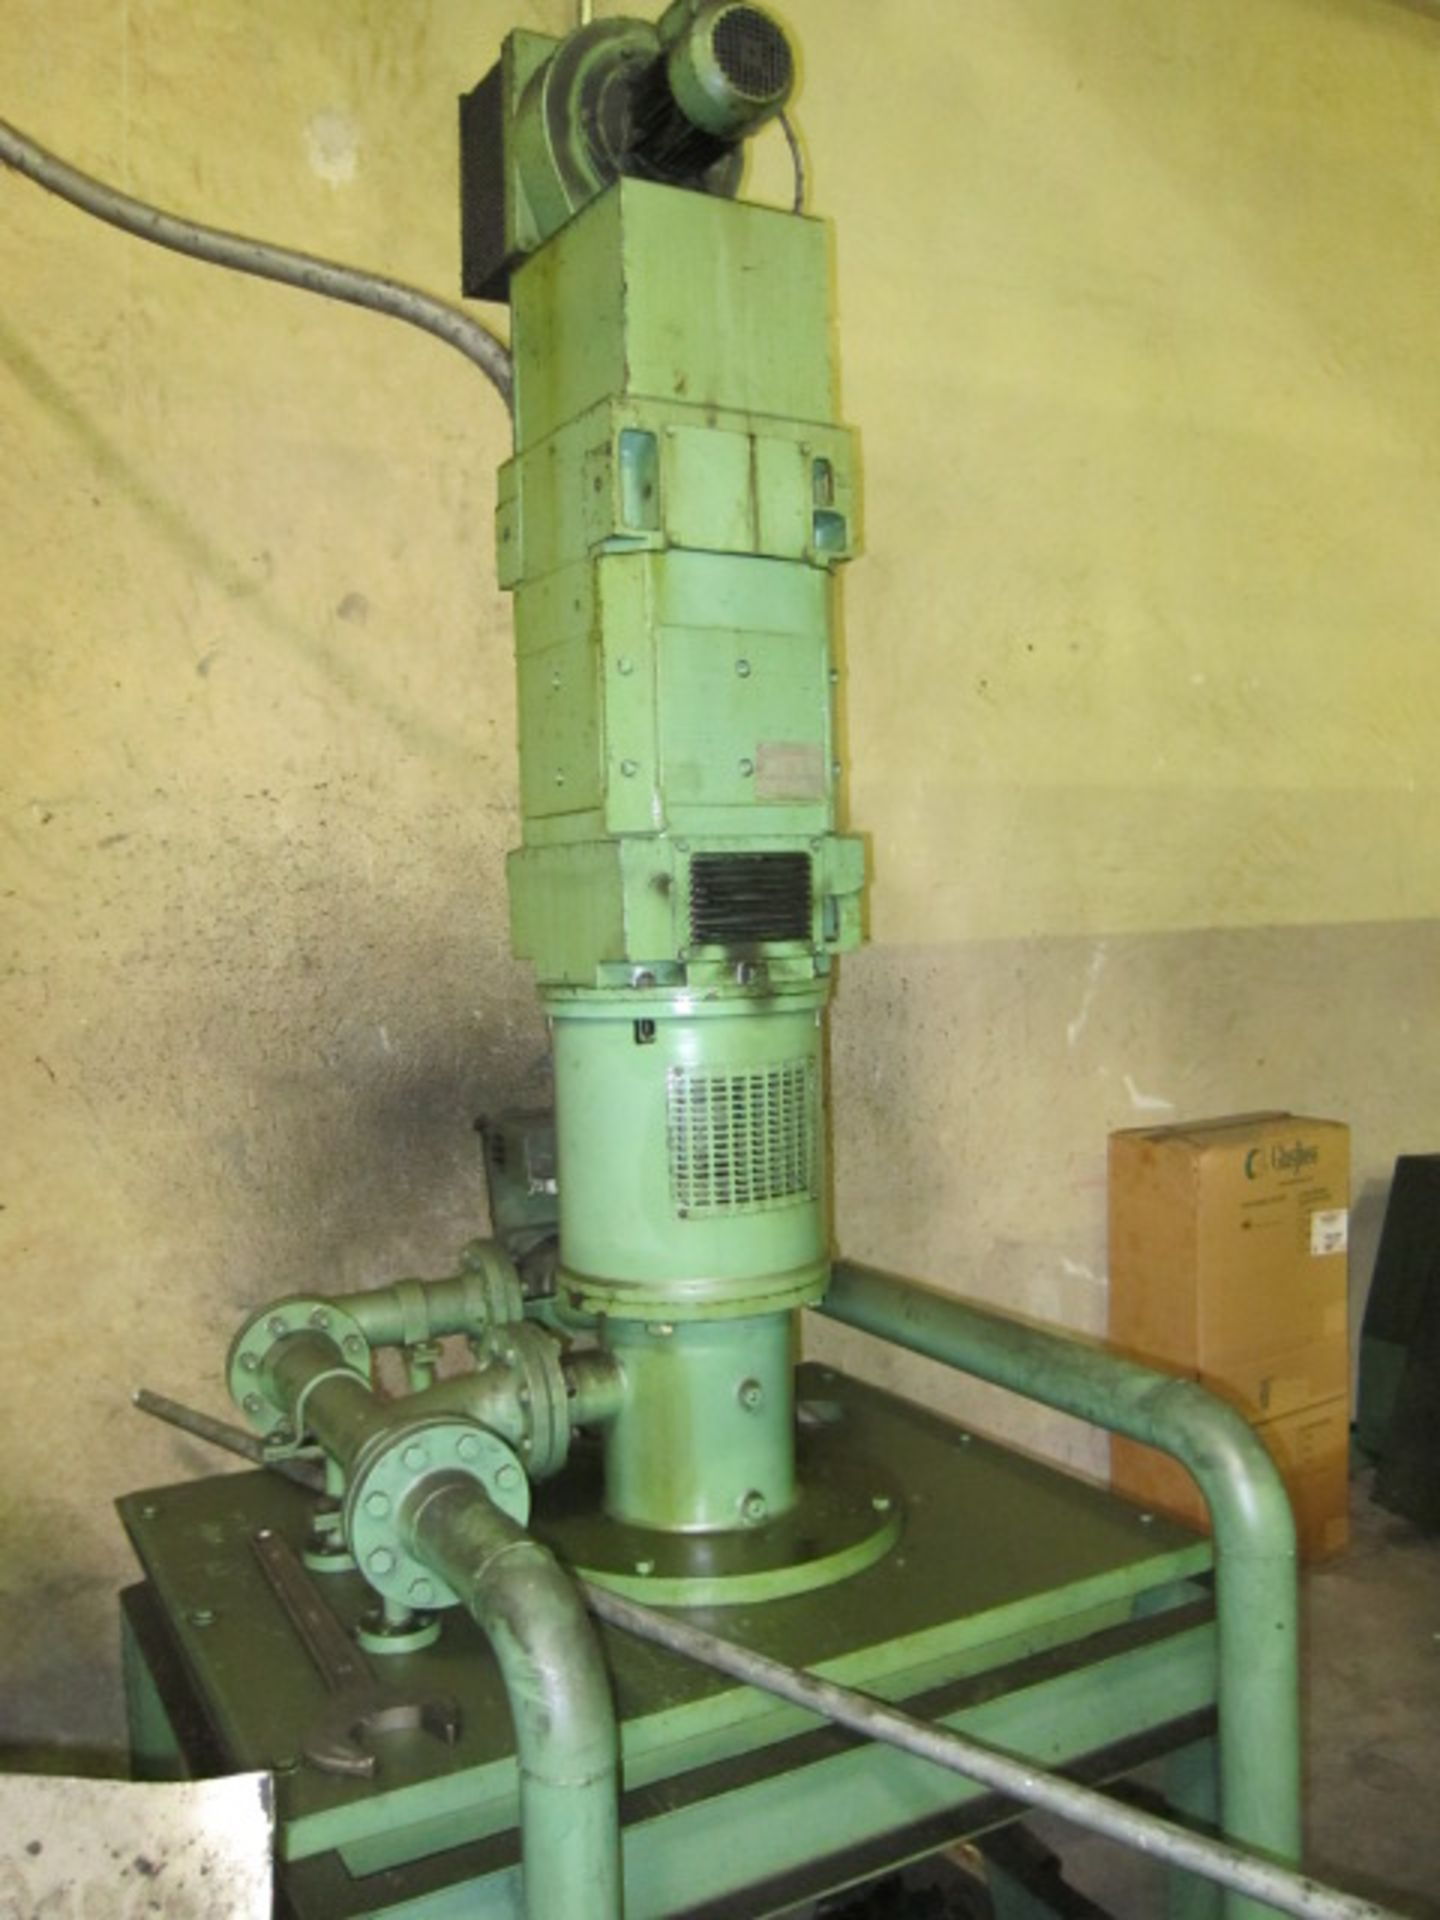 COUNTER ROTATING DEEP HOLE BORING MACHINE, WOHLENBERG MDL. PB2-1000 X 11M, new 1995, 39.37” sw. over - Image 31 of 38